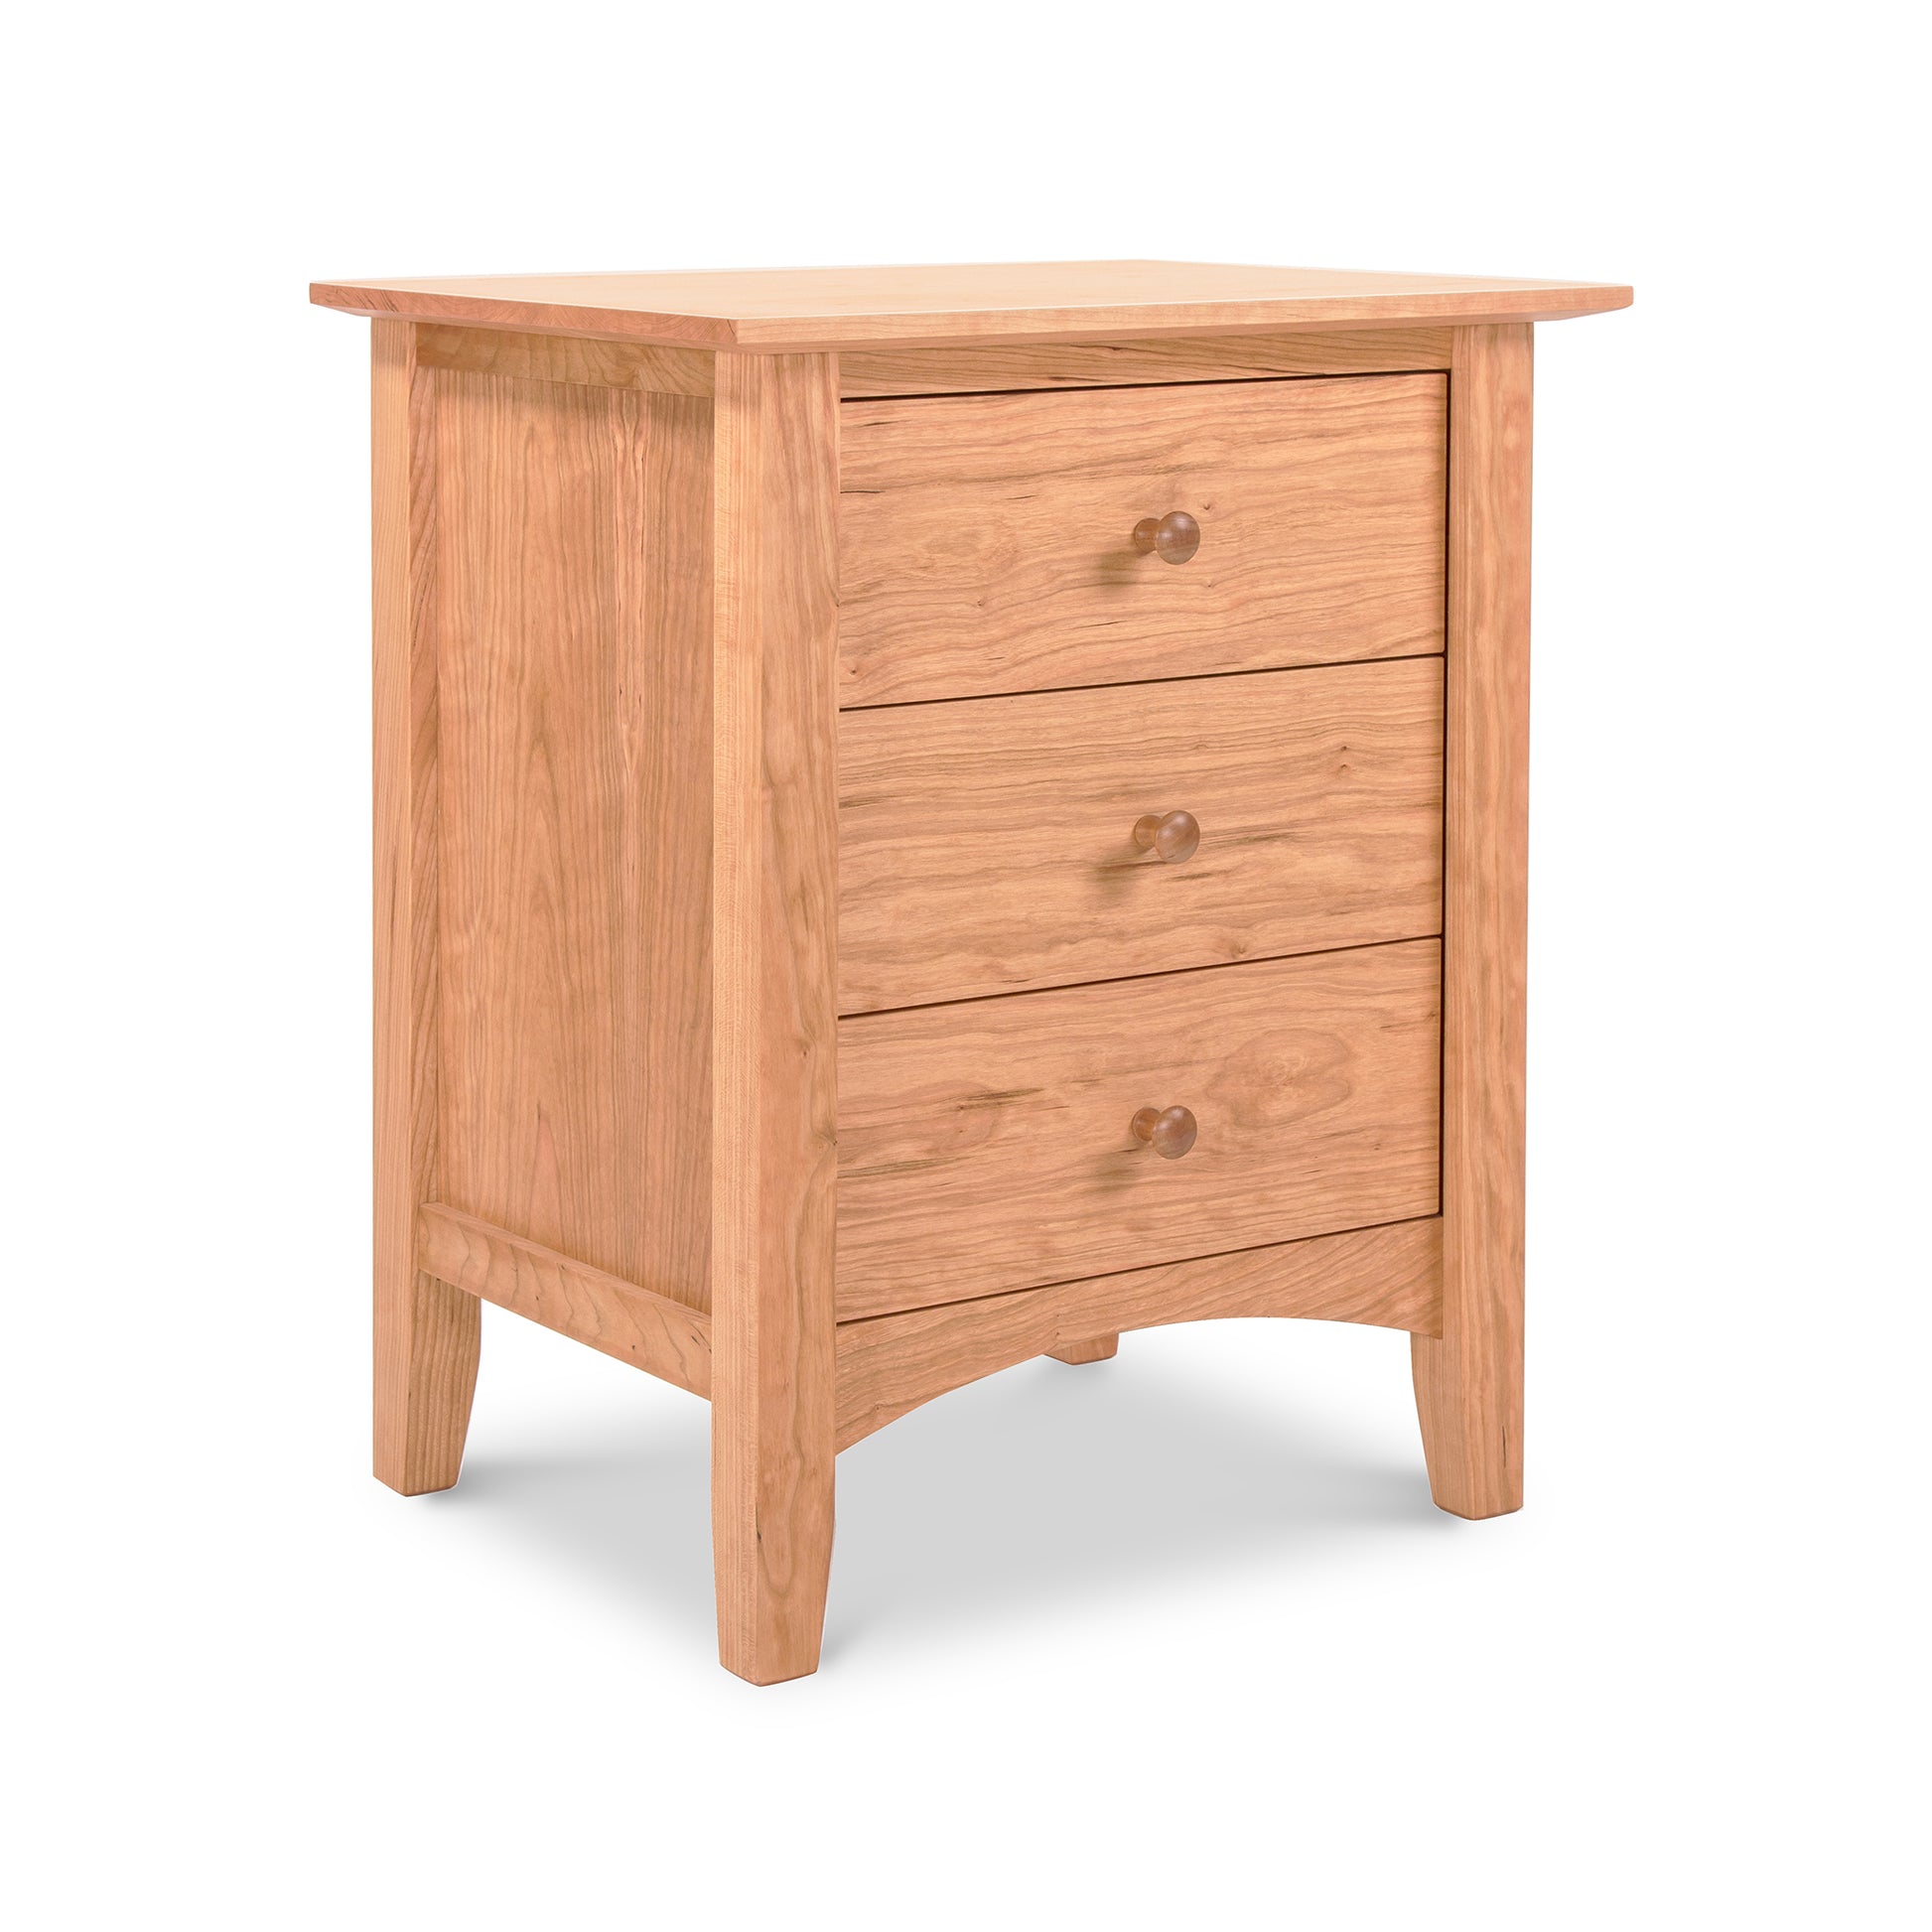 A Maple Corner Woodworks American Shaker 3-Drawer Nightstand, featuring three drawers each with a round knob, and standing on four sturdy legs. The piece, displaying Vermont craftsmanship, is set against a plain white background.